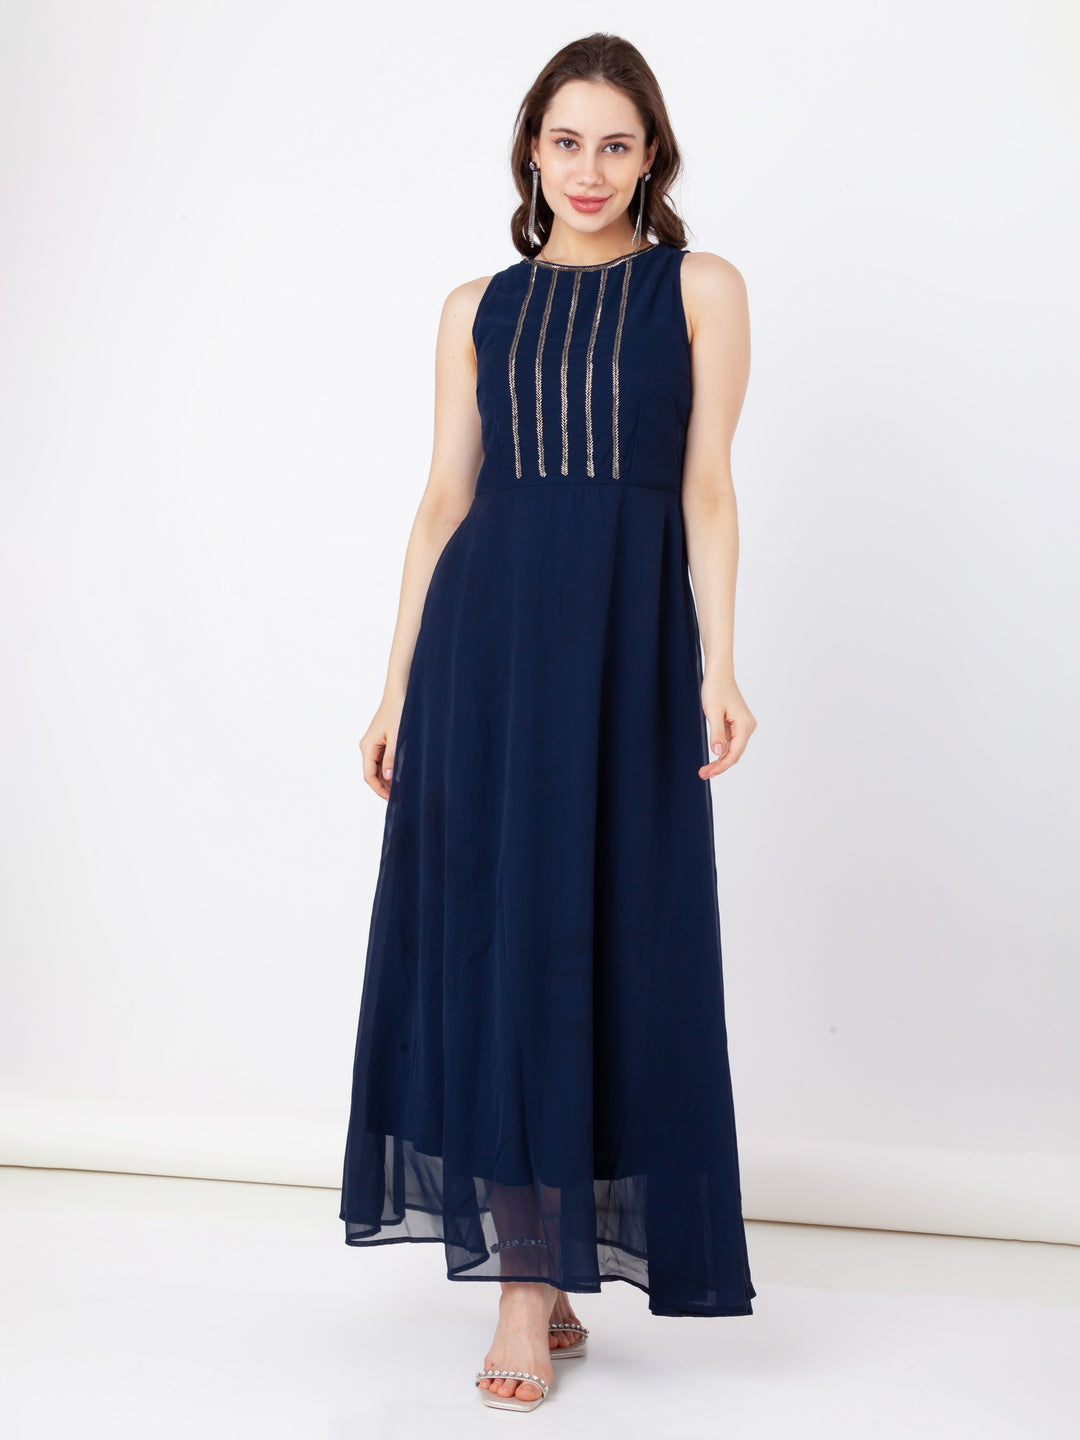 Blue_Embroidered_Flared_Maxi_Dress_2